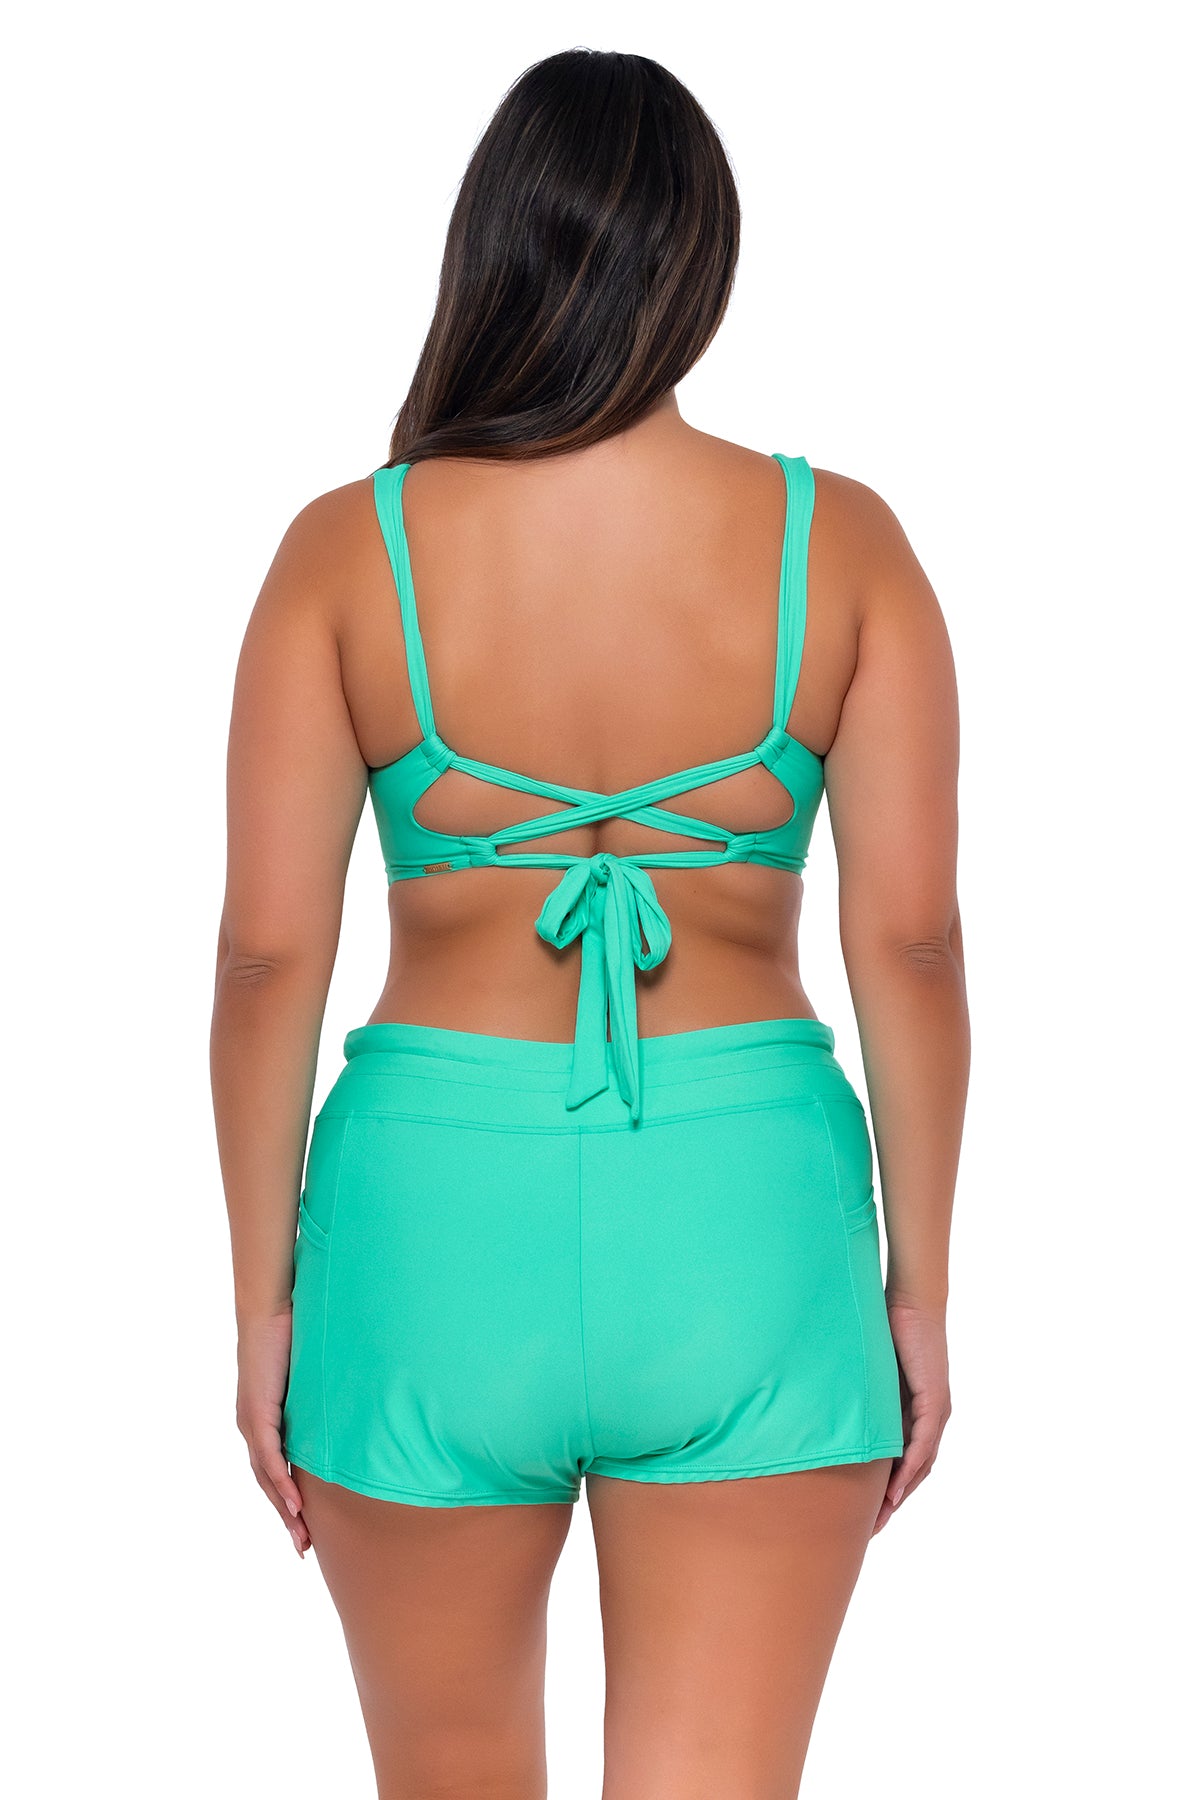 Back pose #1 of Nicky wearing Sunsets Mint Elsie Top with matching Laguna Swim Short